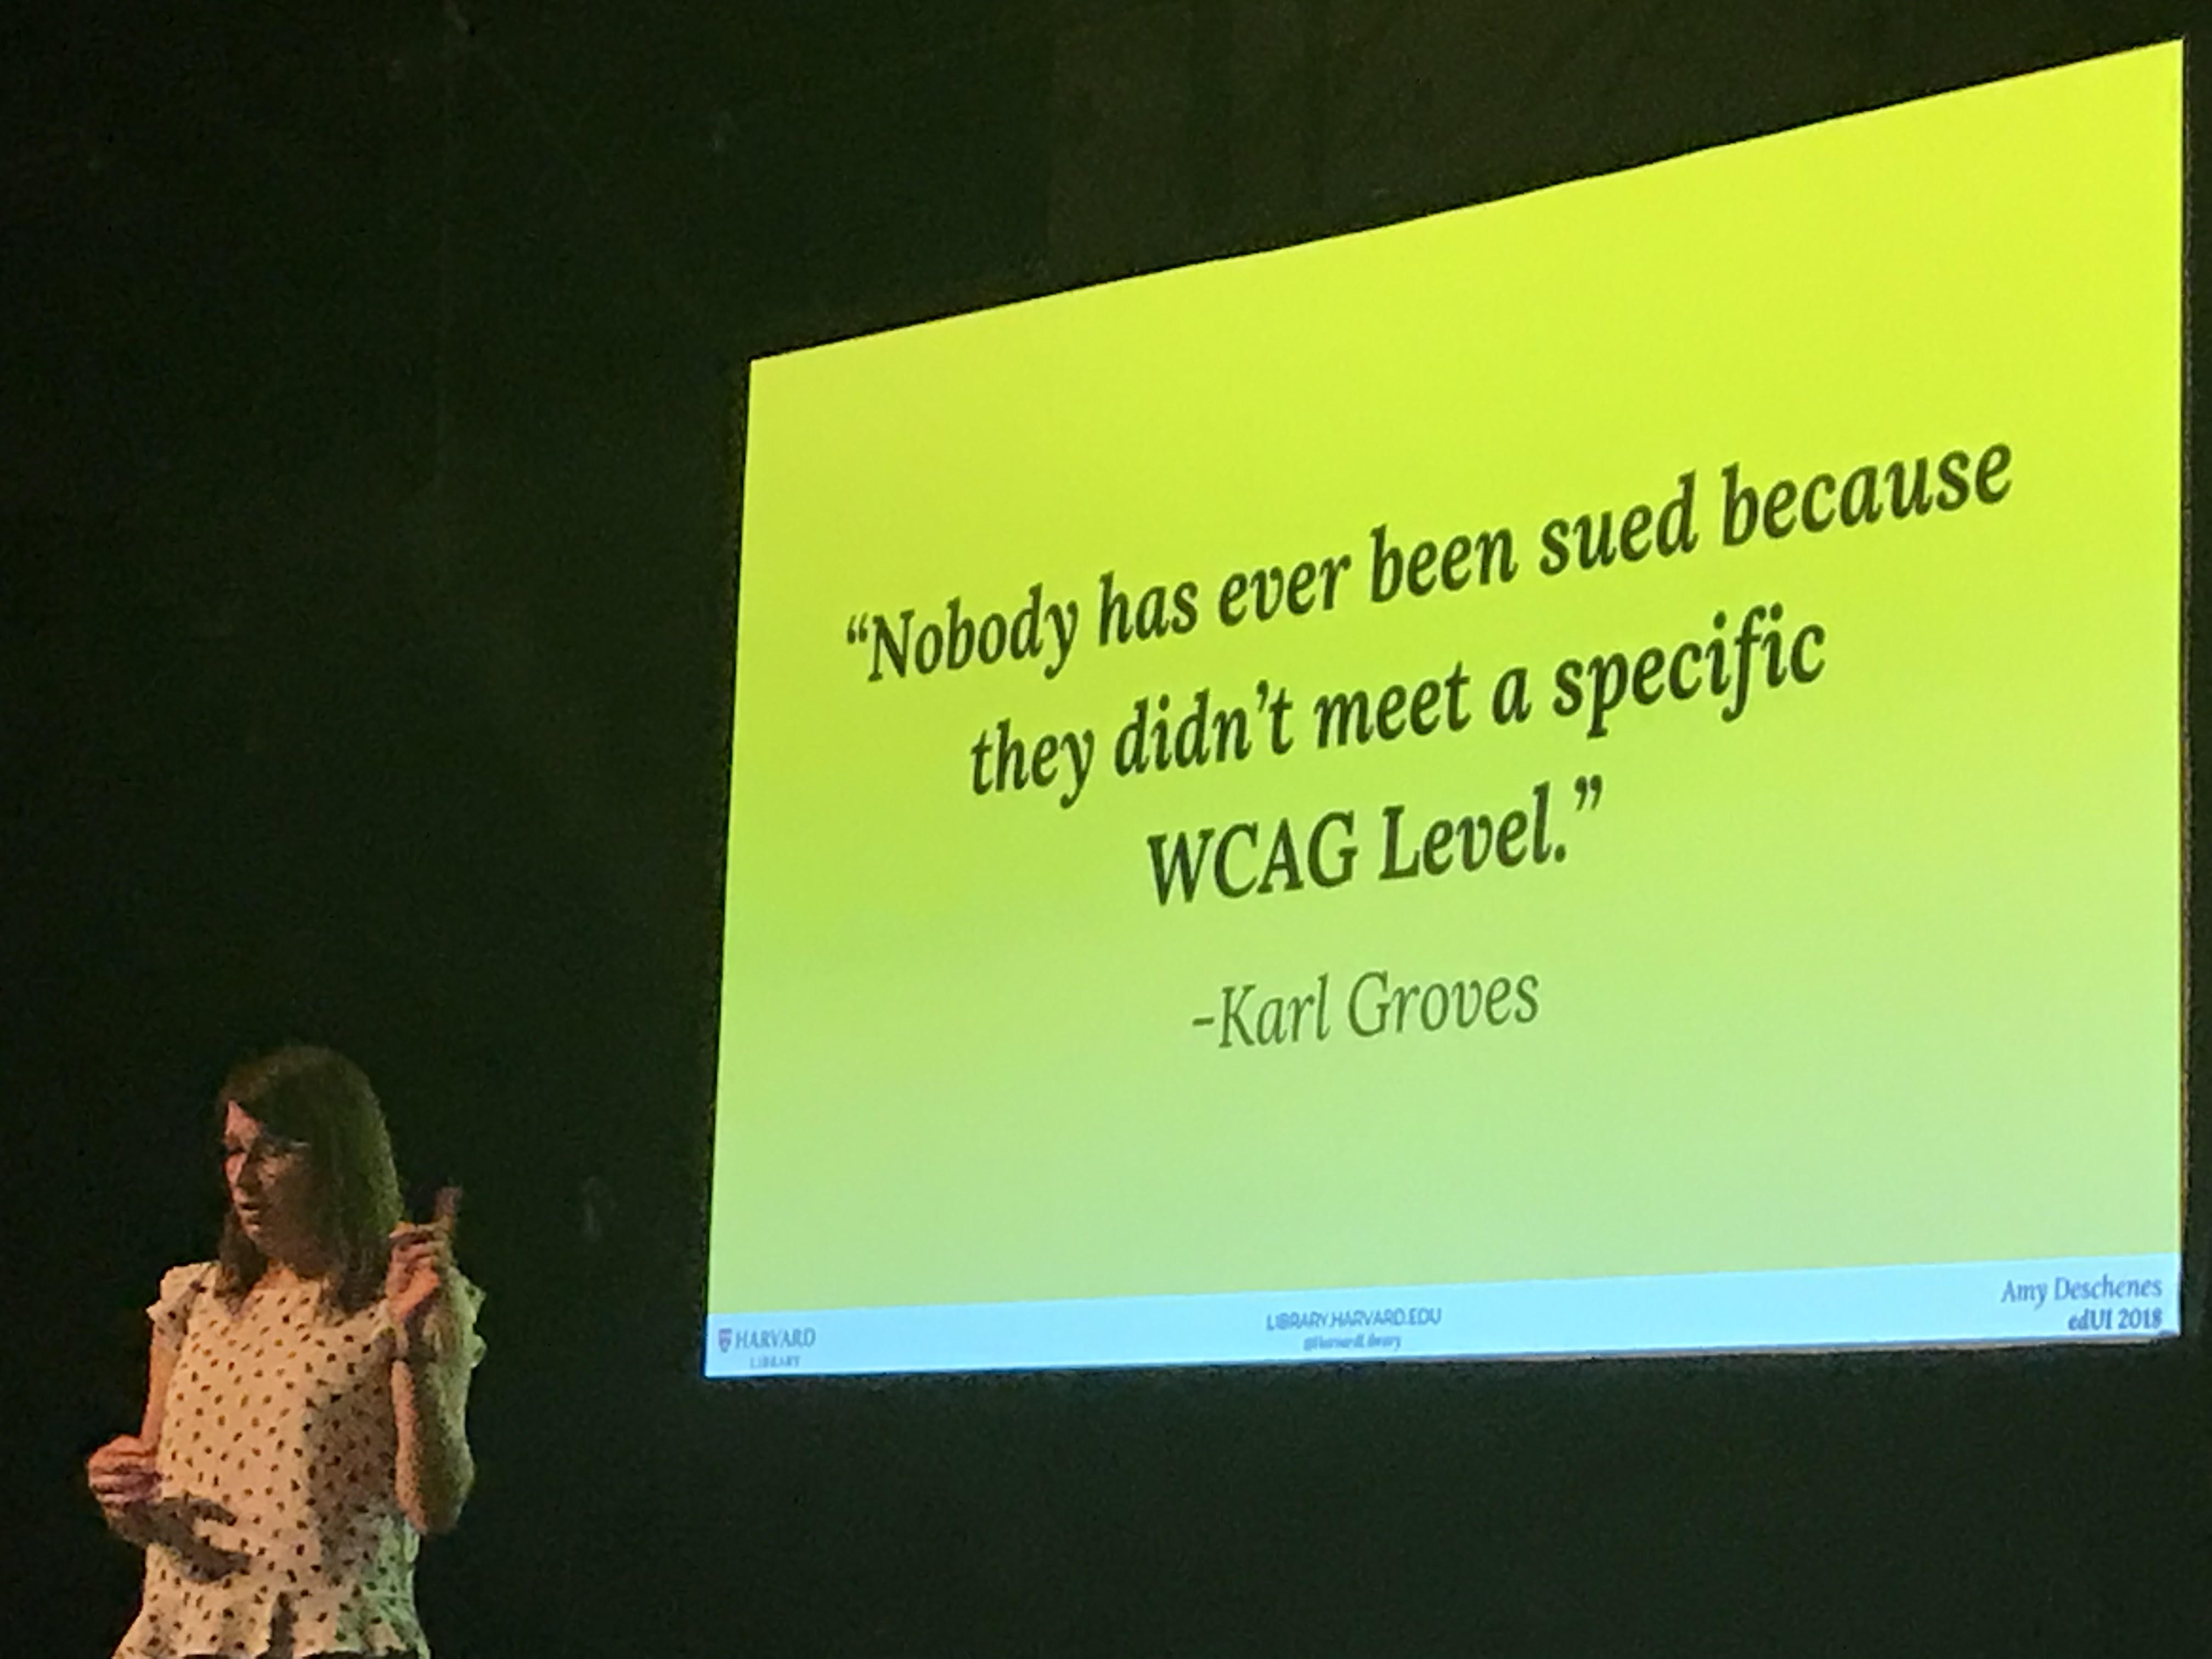 A female lecturer in front of a slide that has the quotation '"Nobody has ever been sued because they didn't meet a specific WCAG Level." -Karl Groves' written on it. 